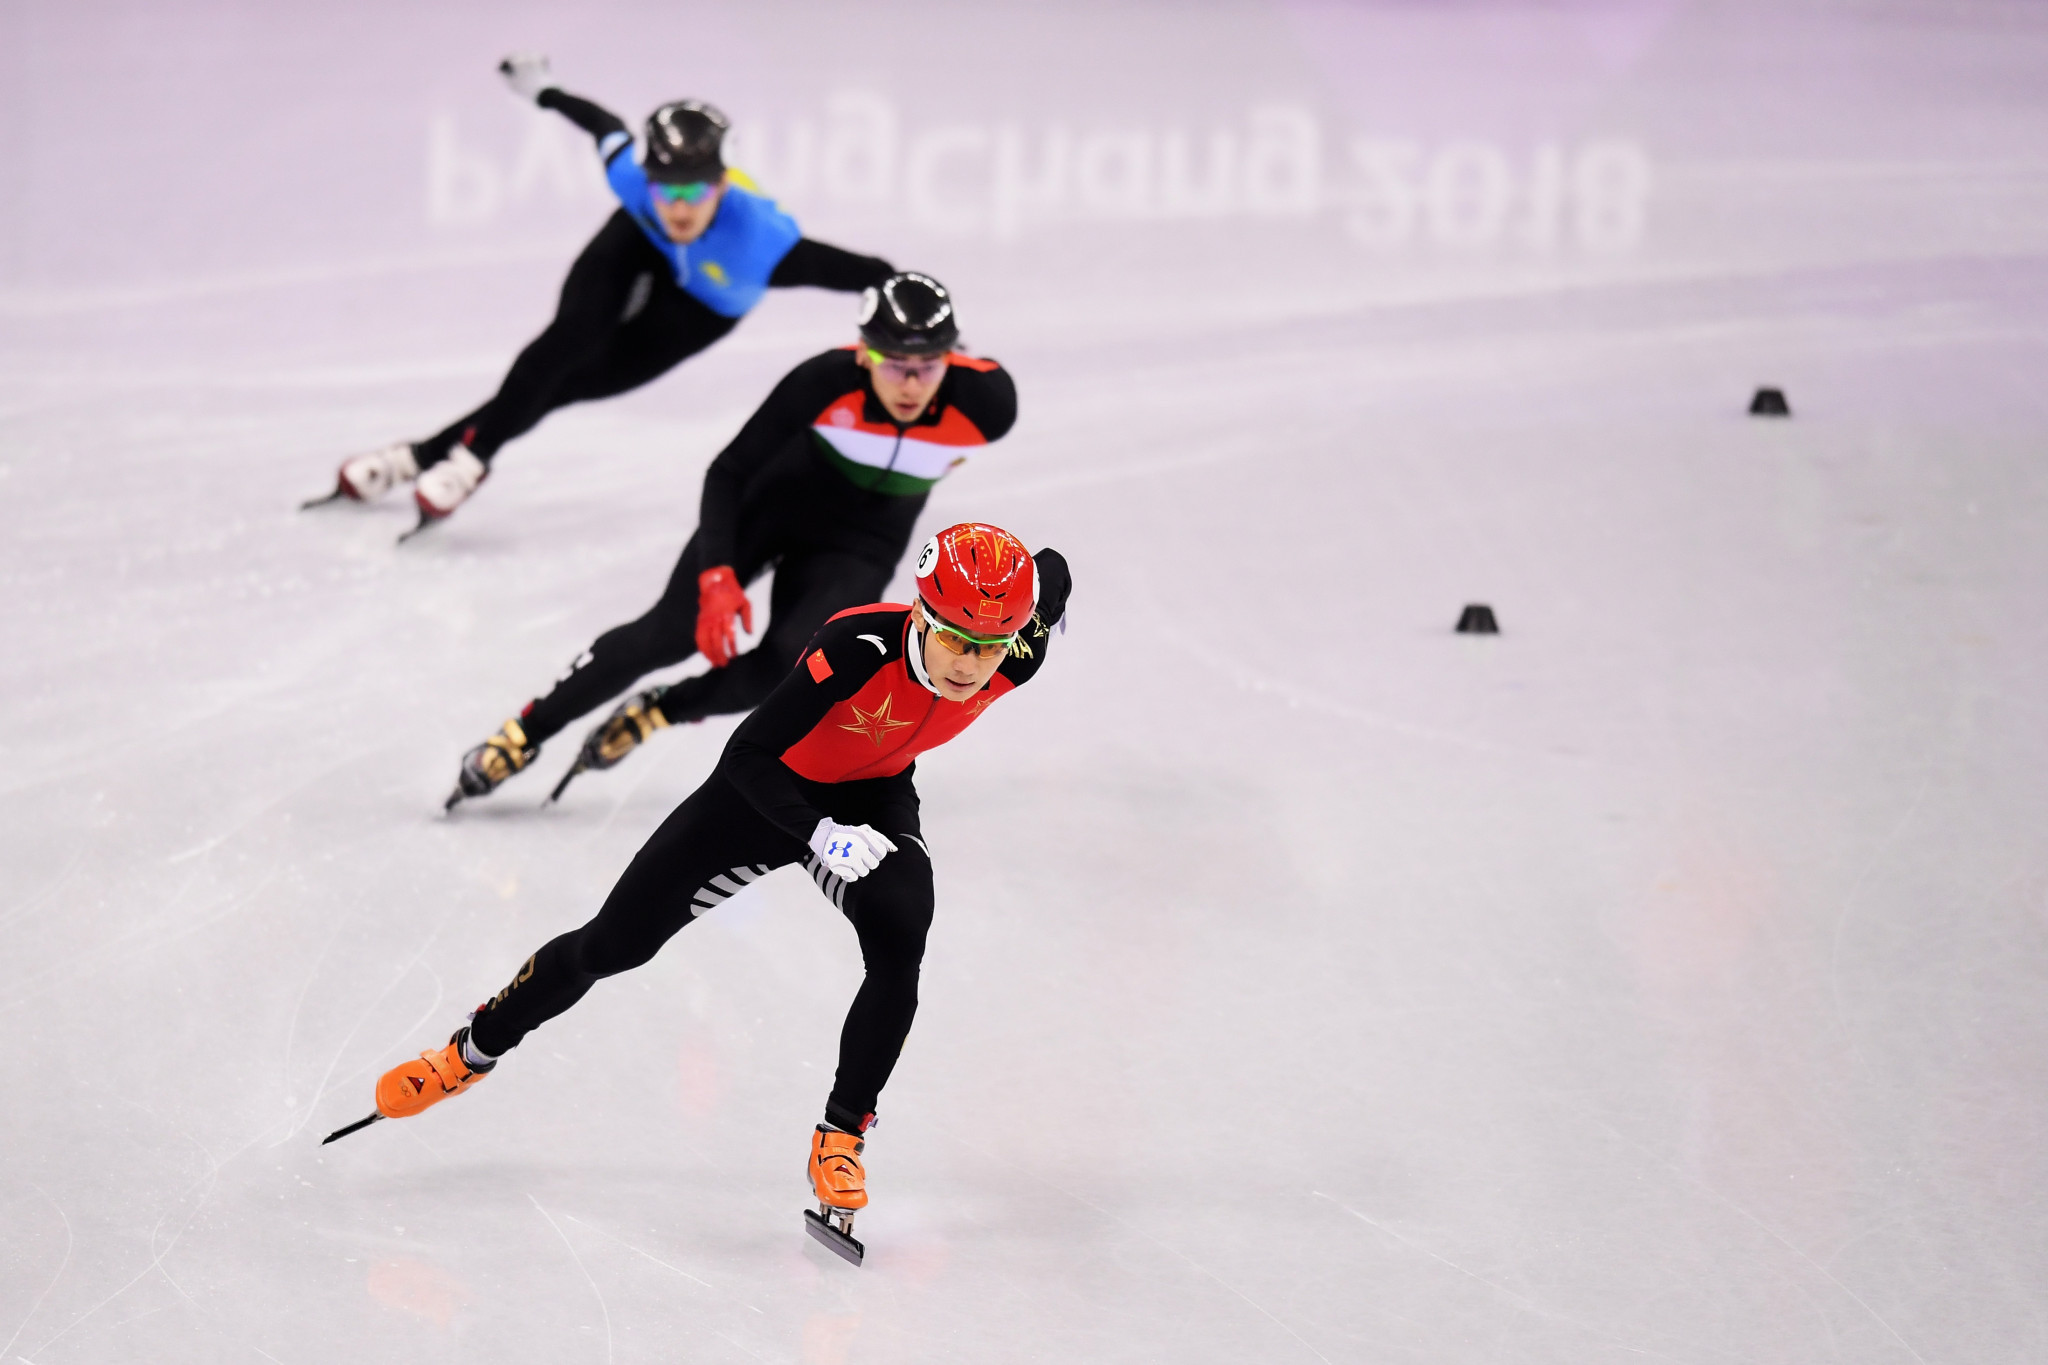 Olympic 500 metres champion Wu Dajing endured a difficult start to the World Short Track Speed Skating Championships ©Getty Images